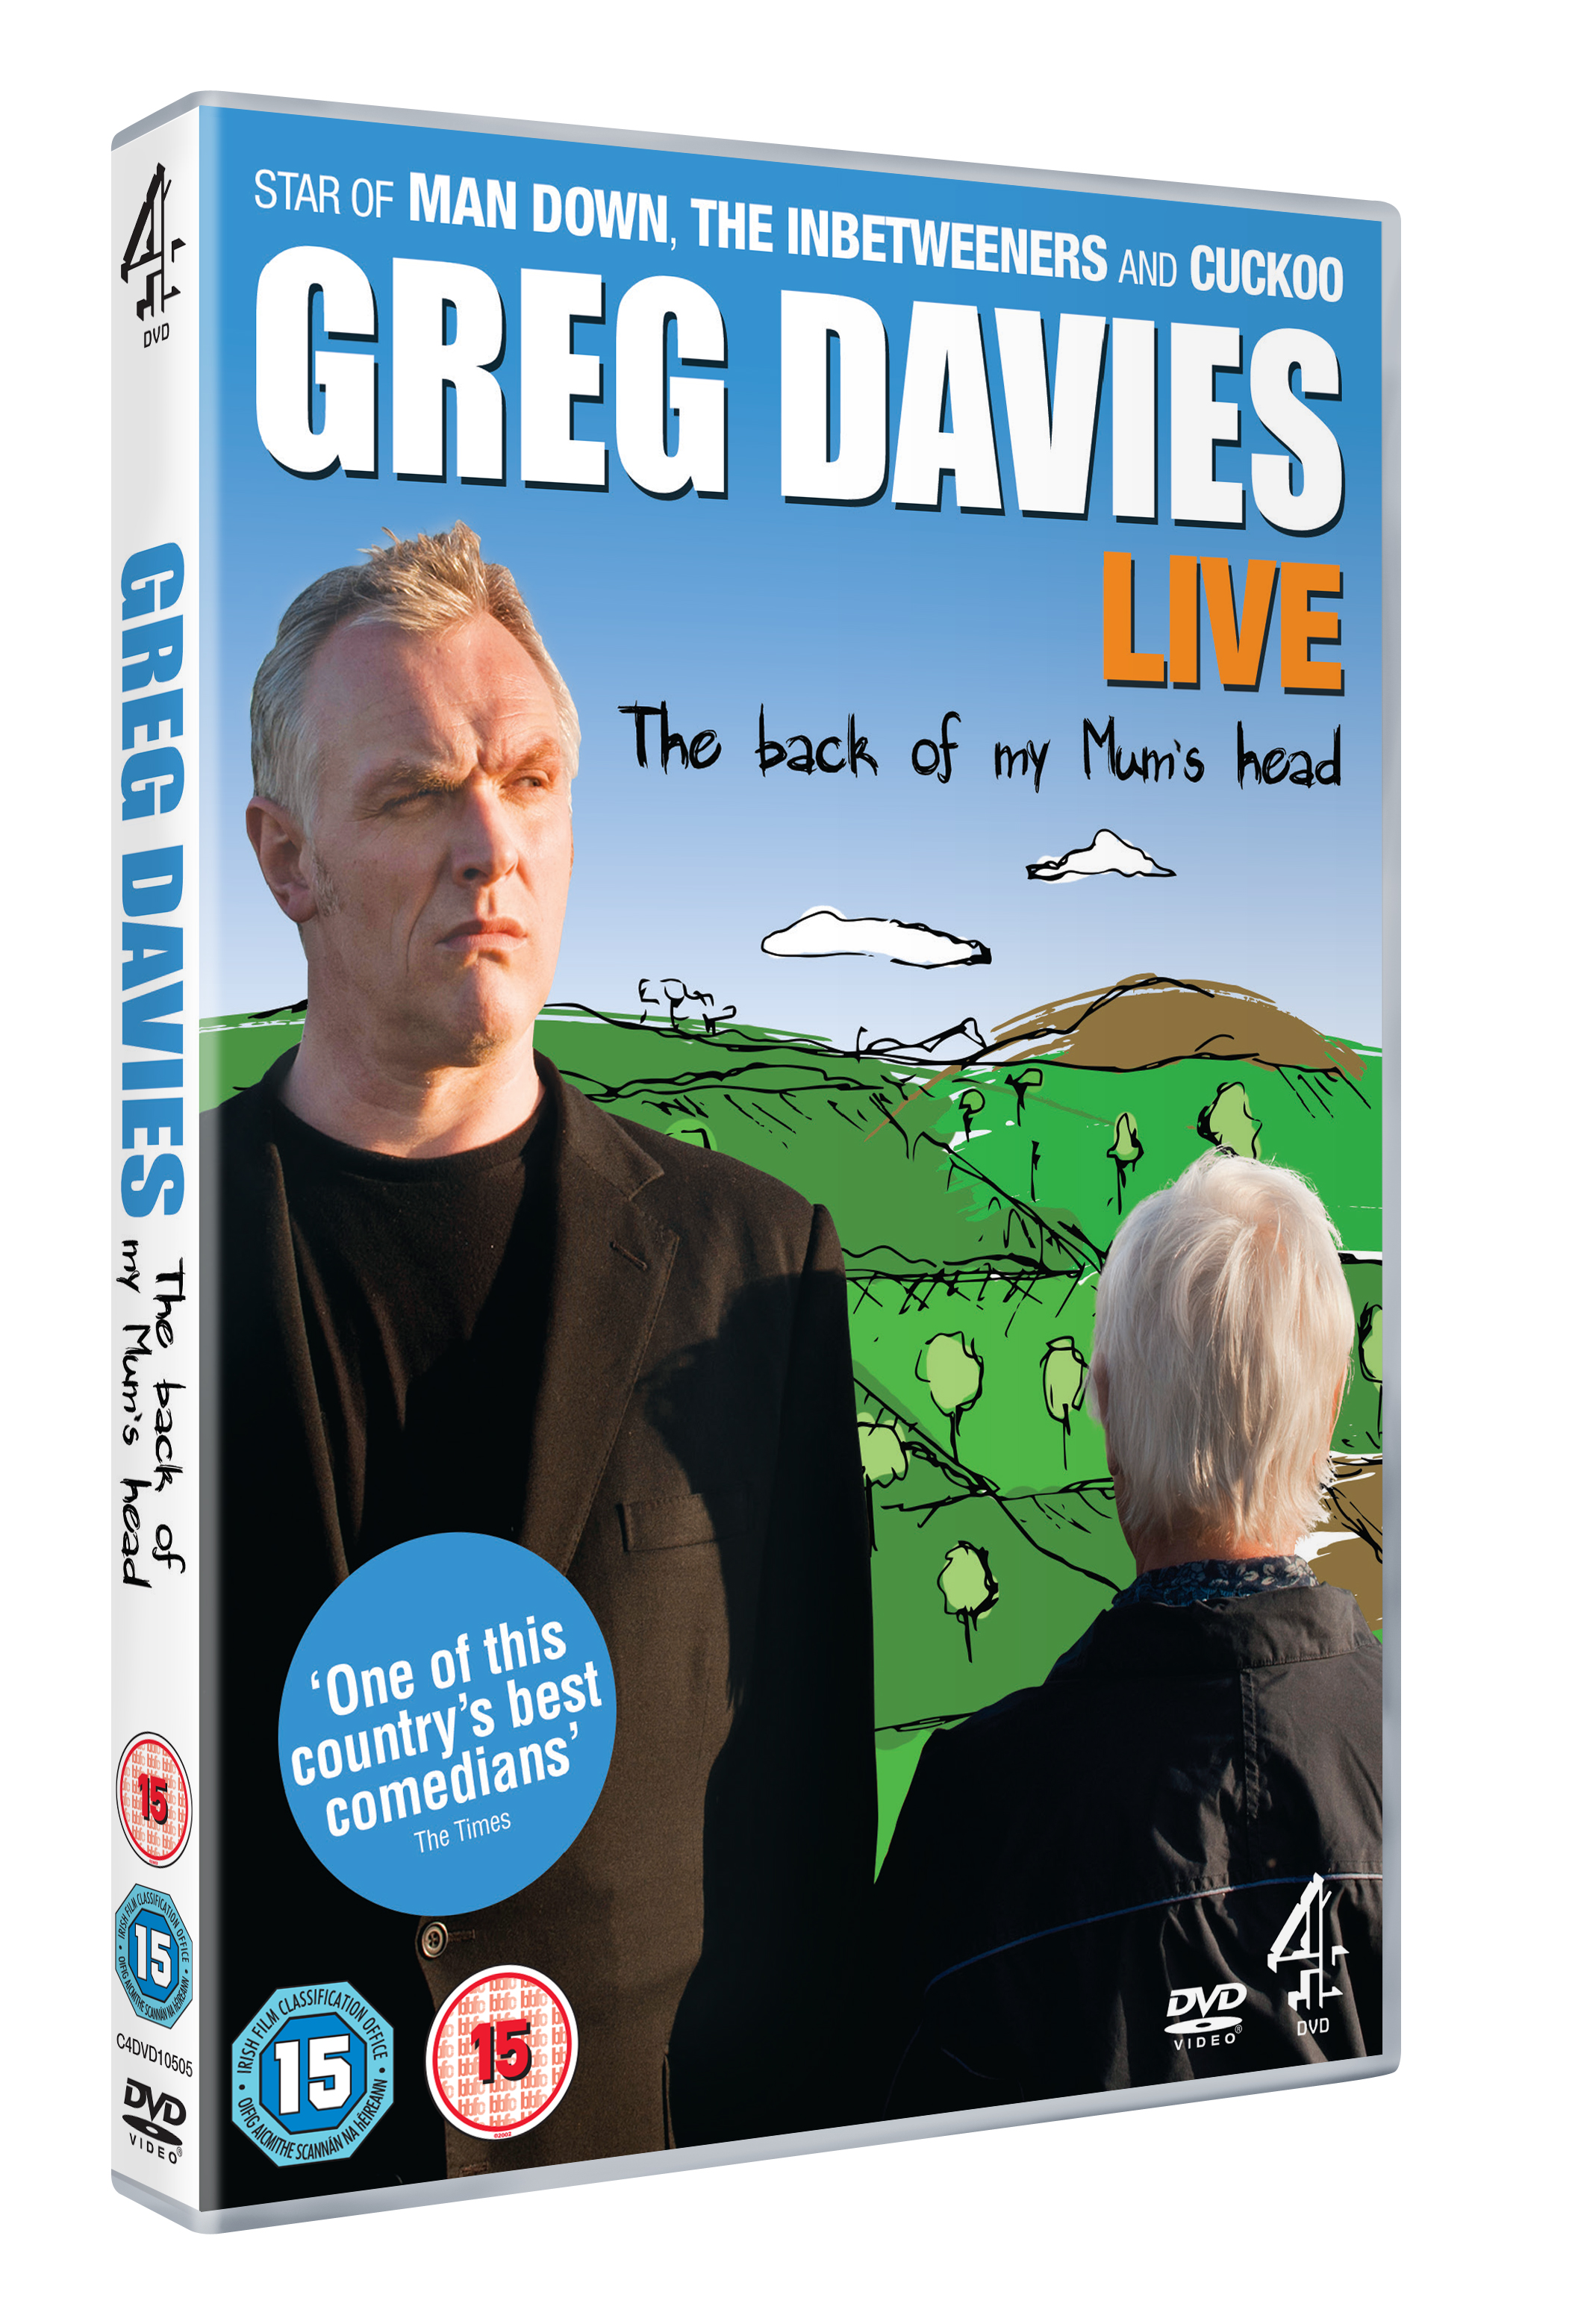 GREG DAVIES, THE BACK OF MY MUM'S HEAD: NEW FOR DVD AND BLU-RAY THIS AUTUMN